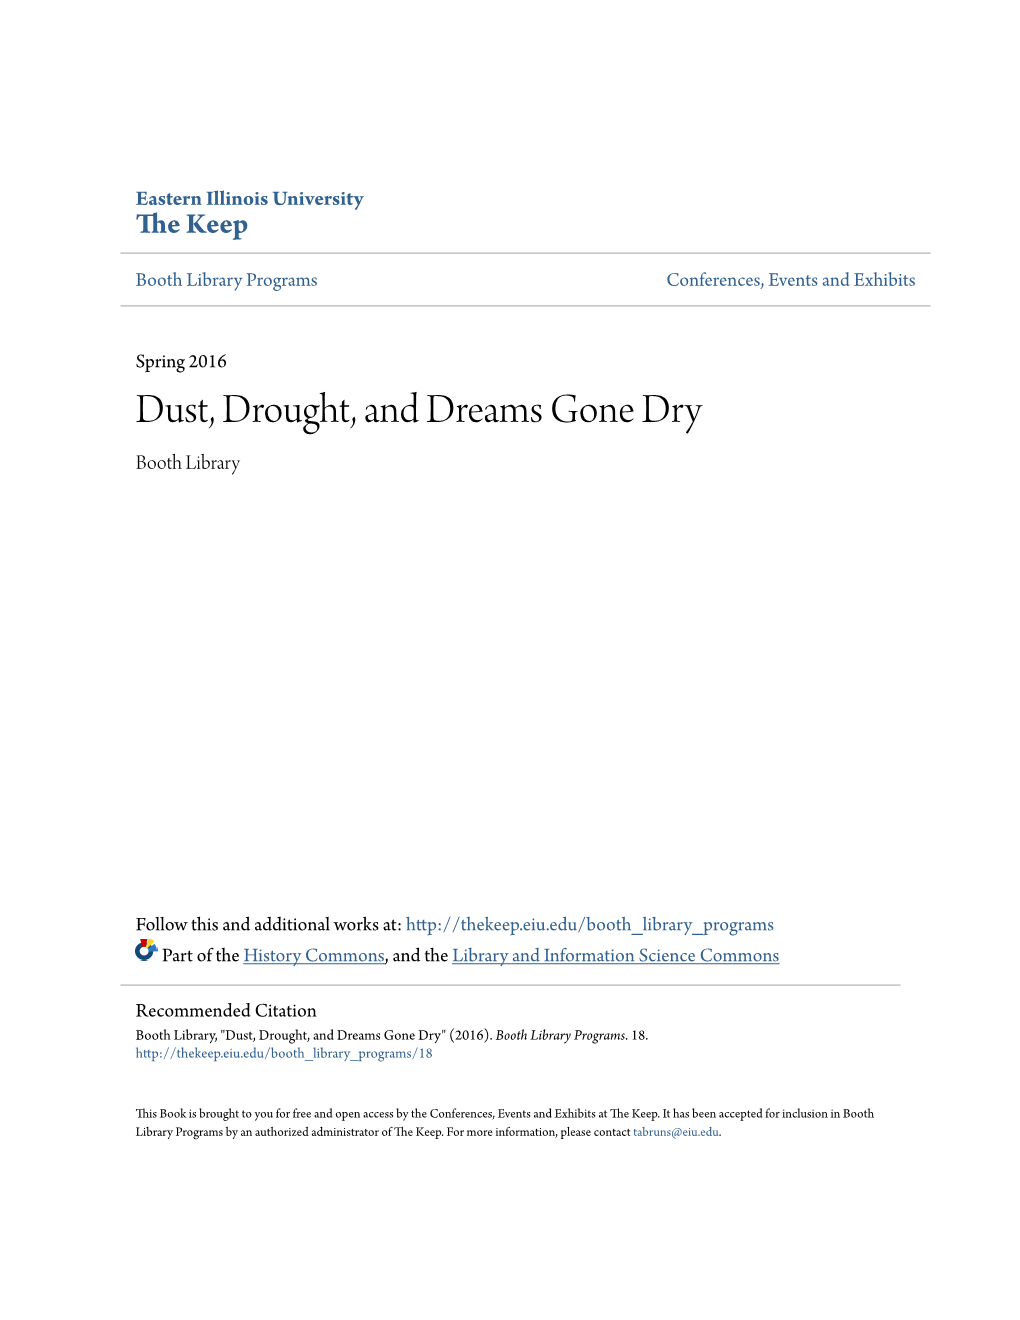 Dust, Drought, and Dreams Gone Dry Booth Library